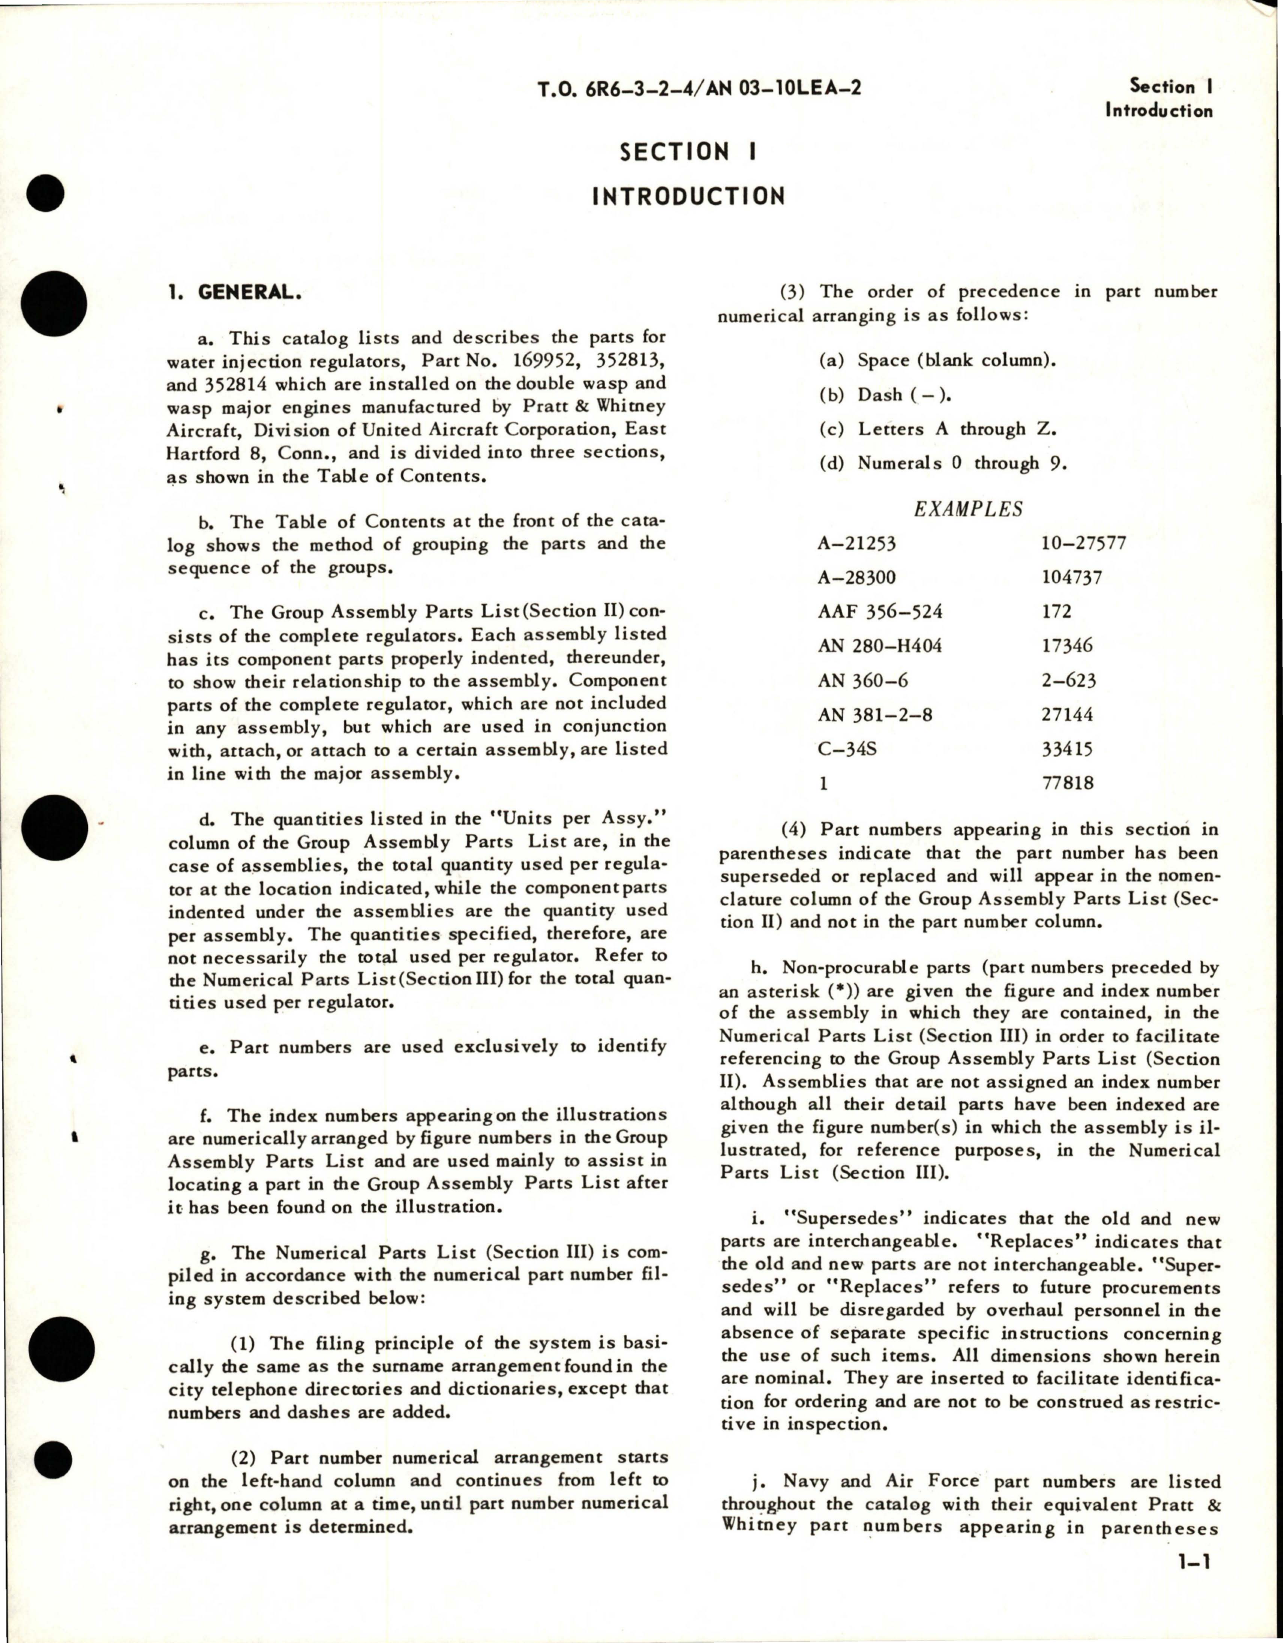 Sample page 5 from AirCorps Library document: Parts Catalog for Water Injection Regulators